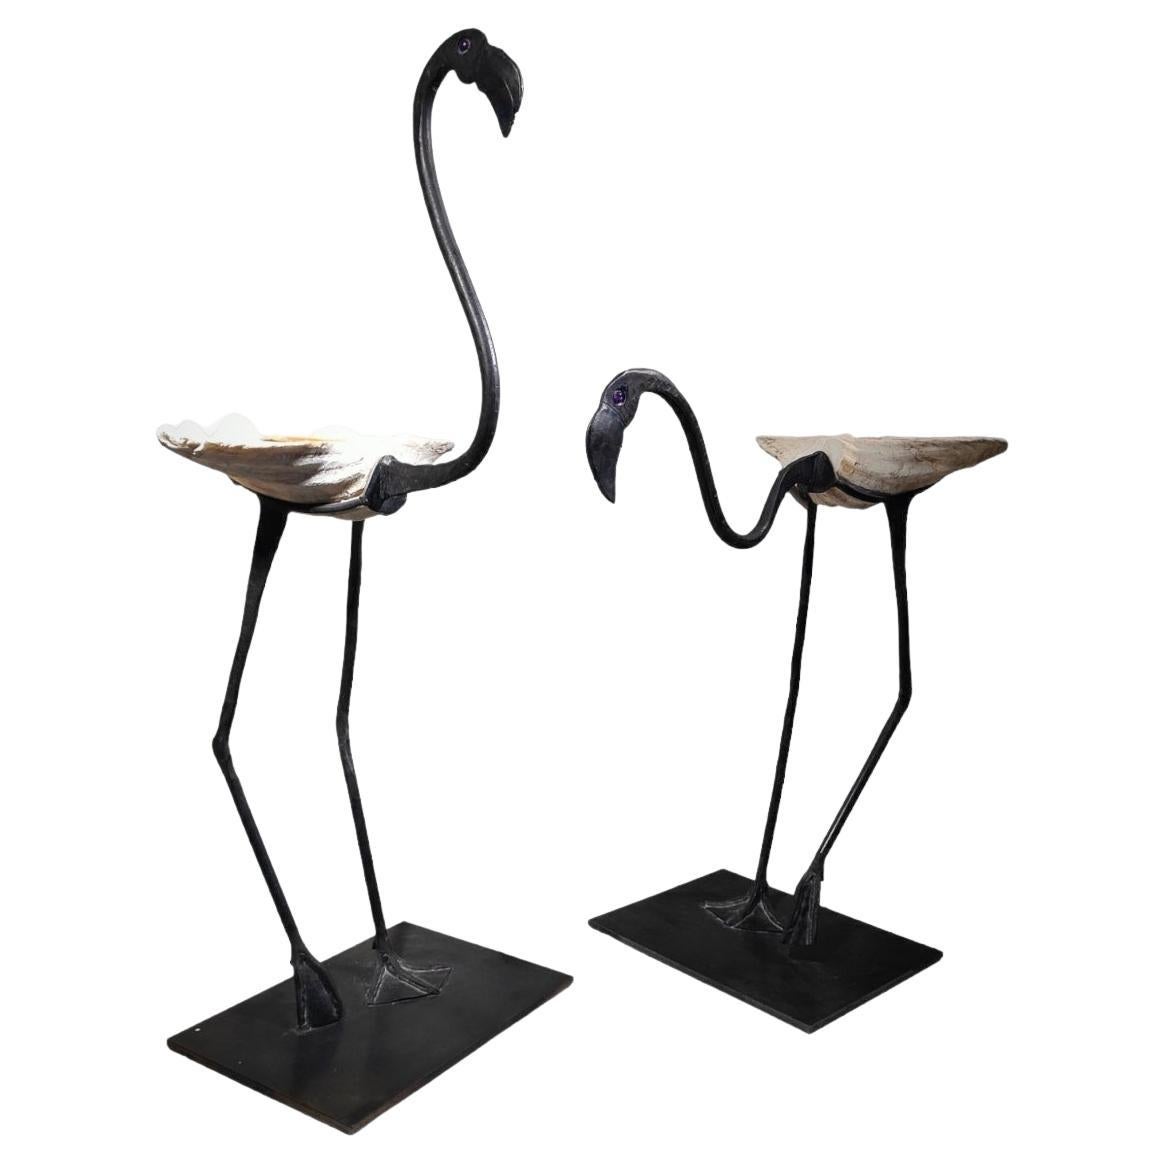 Wrought Iron Sculptures Of Life Size Flamingos For Sale